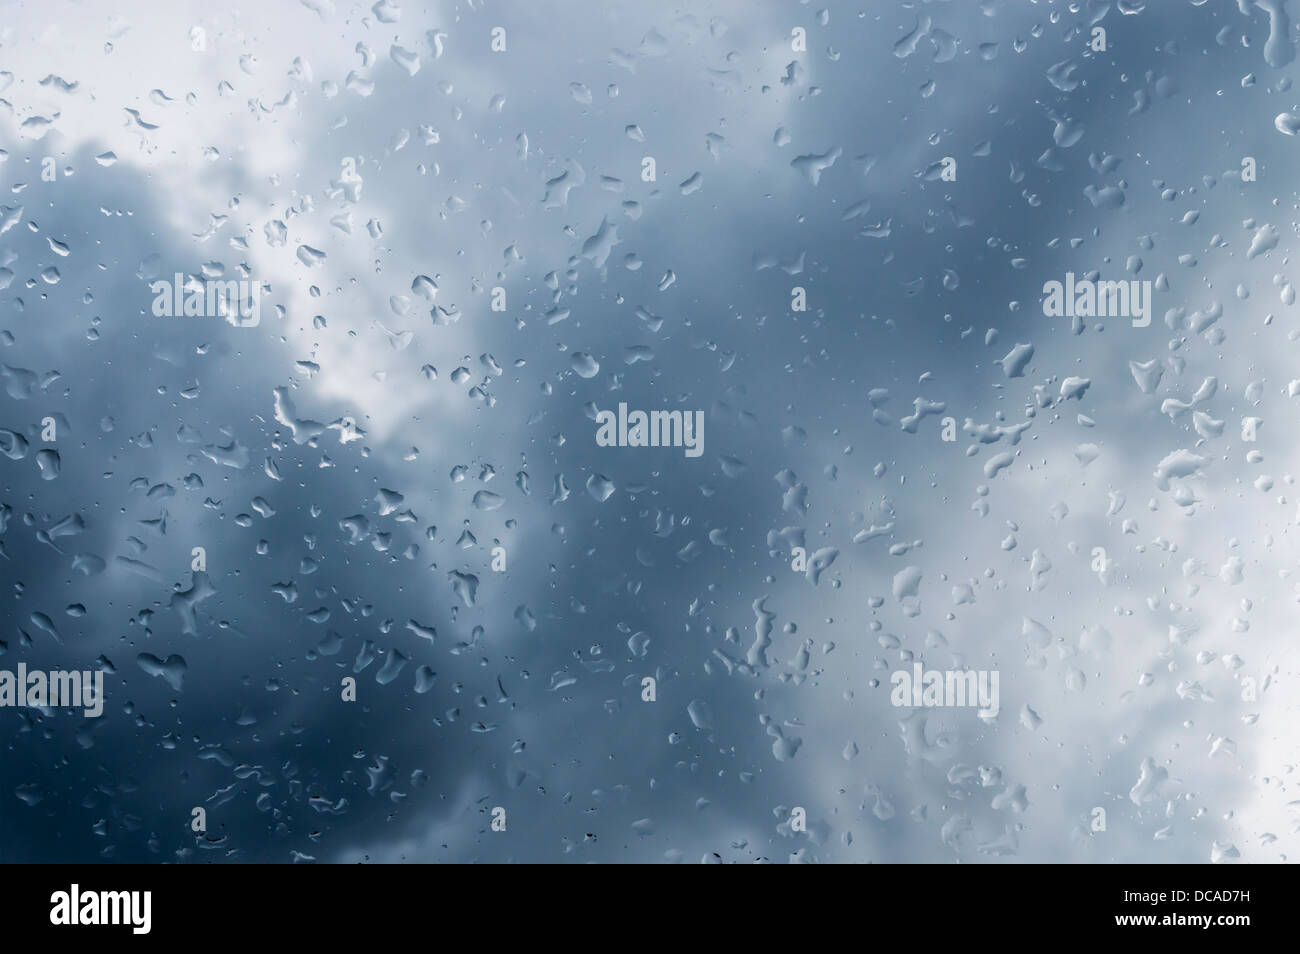 Droplets of water on window Stock Photo